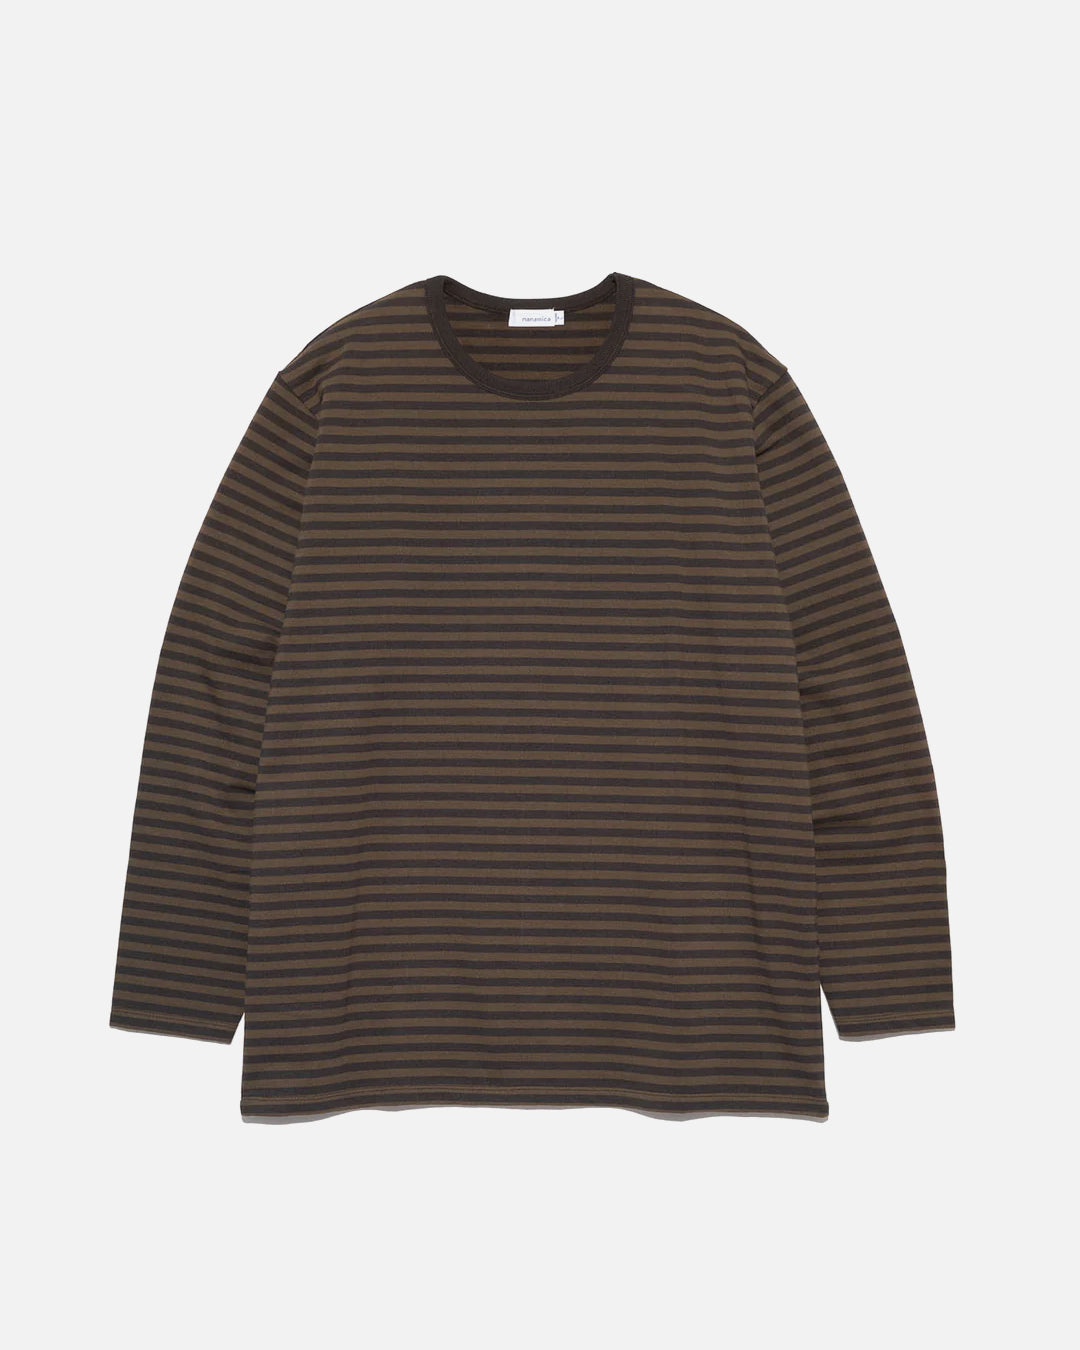 Nanamica COOLMAX St. Jersey L/S Tee in Brown and Charcoal | Blues 